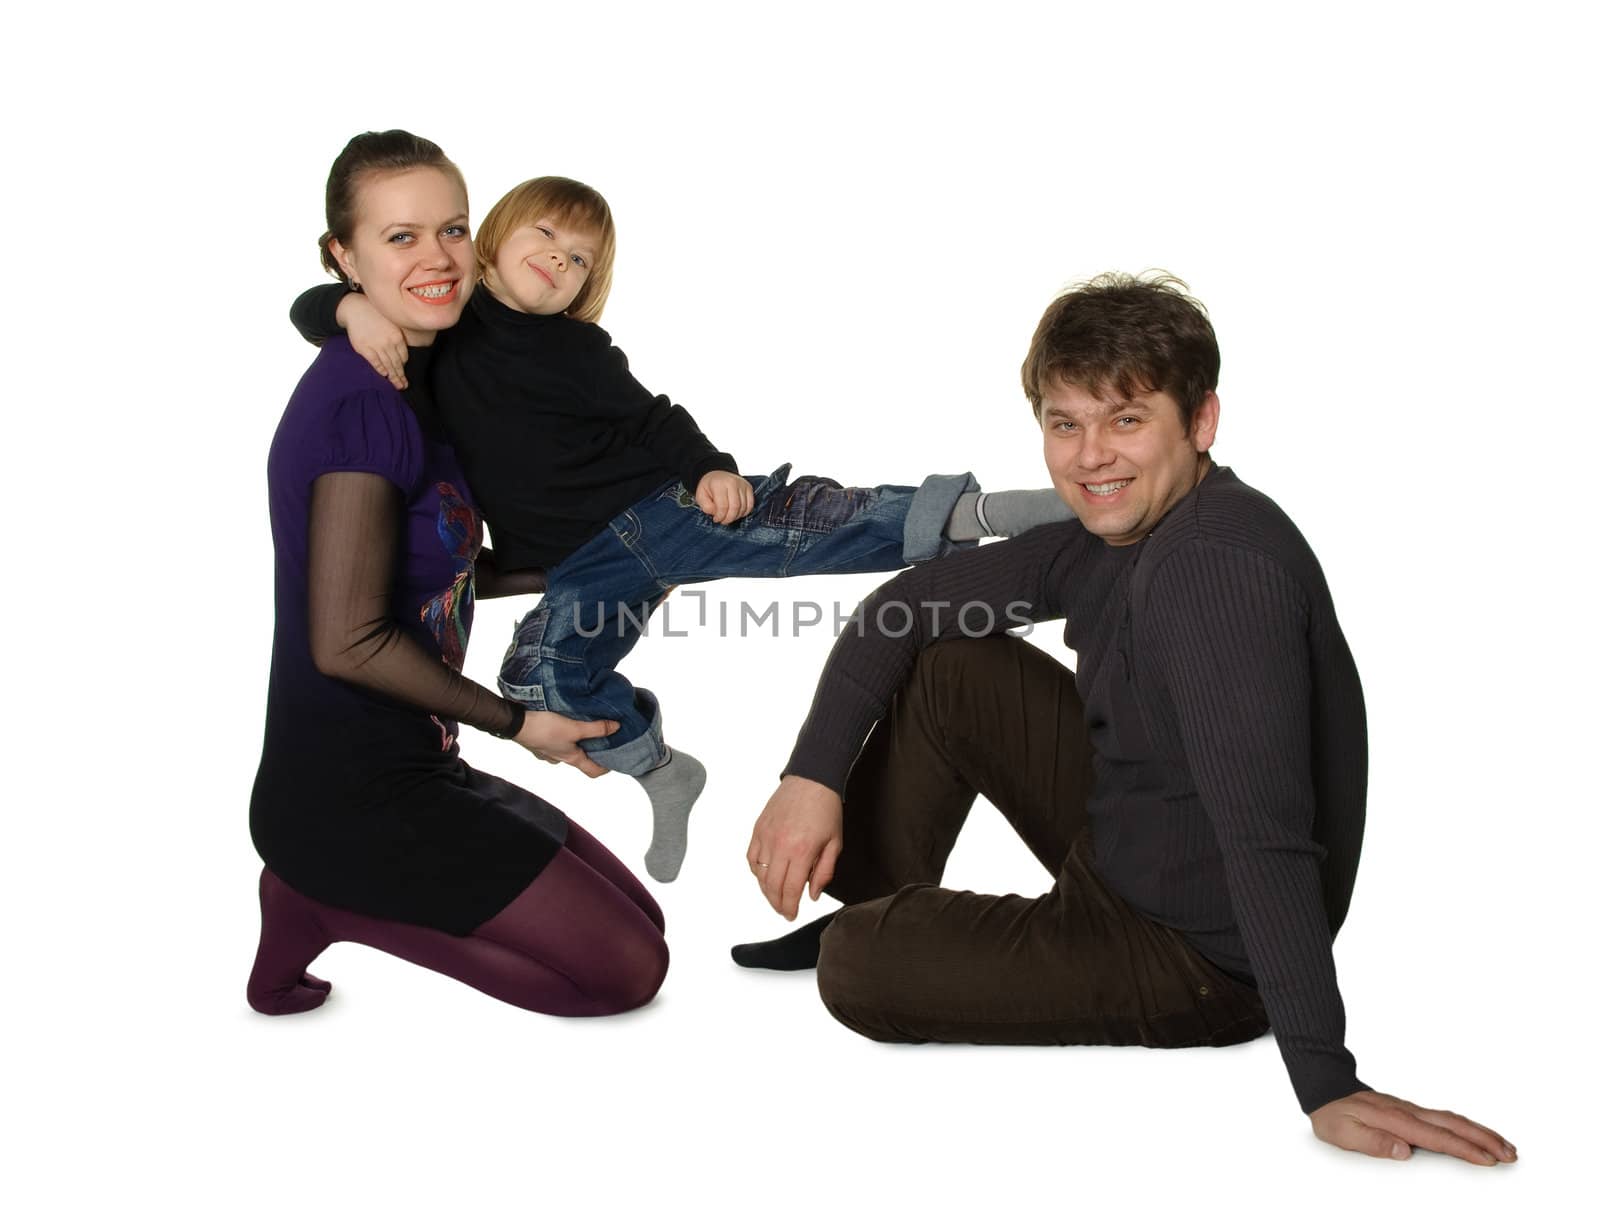 Happy family. It is isolated on a white background